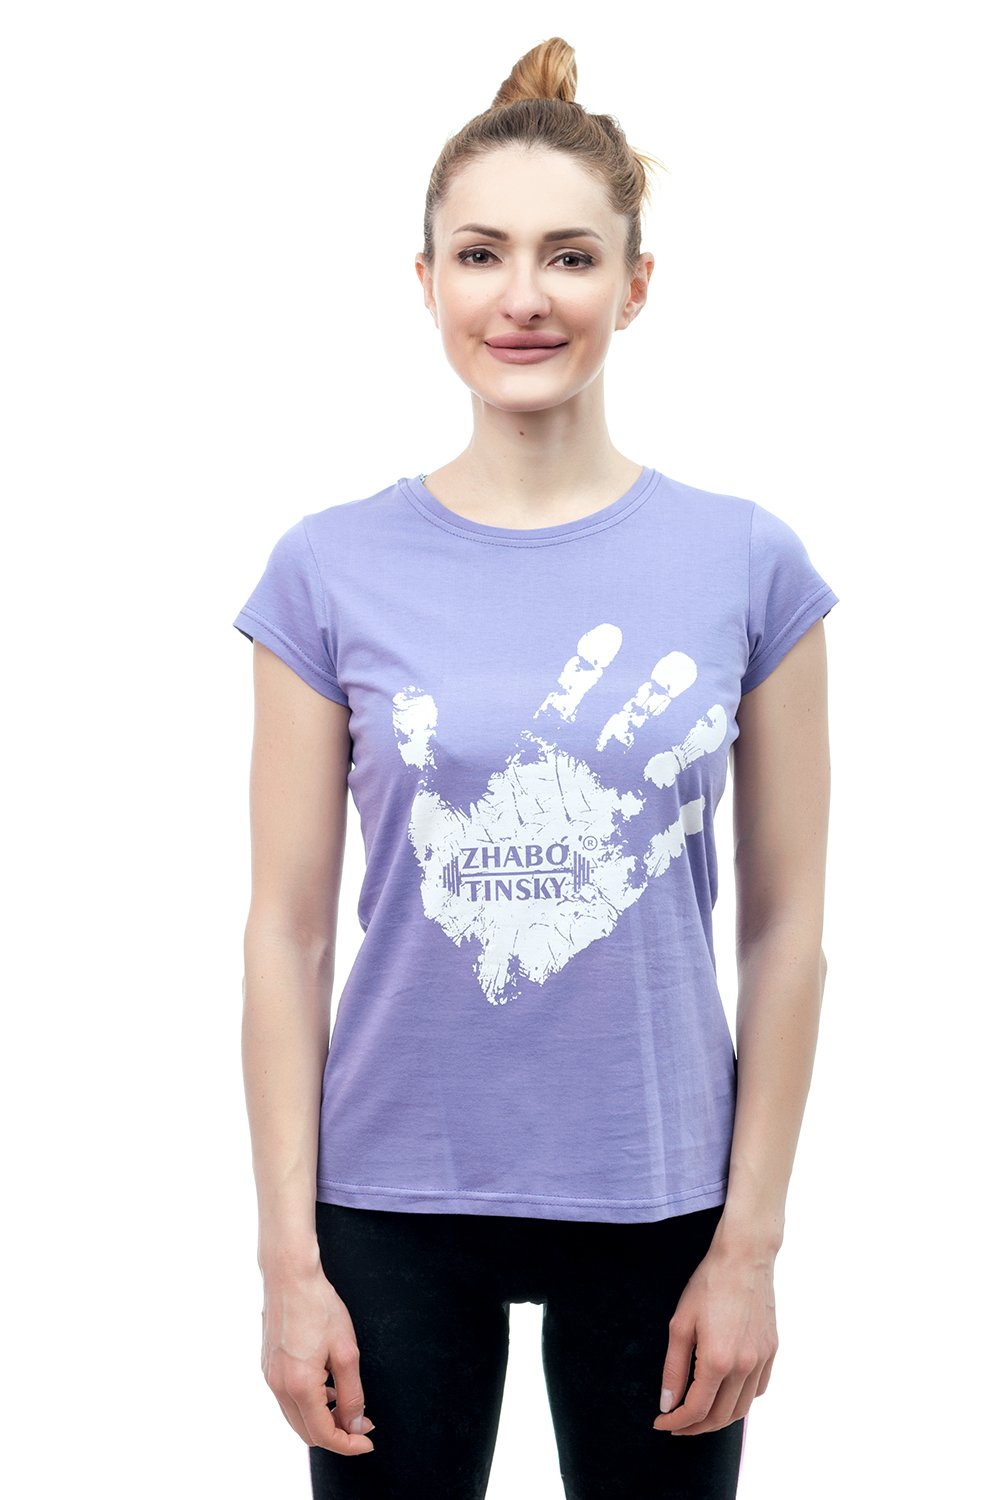 Women's Tee Hand of the winner, lilac, size S